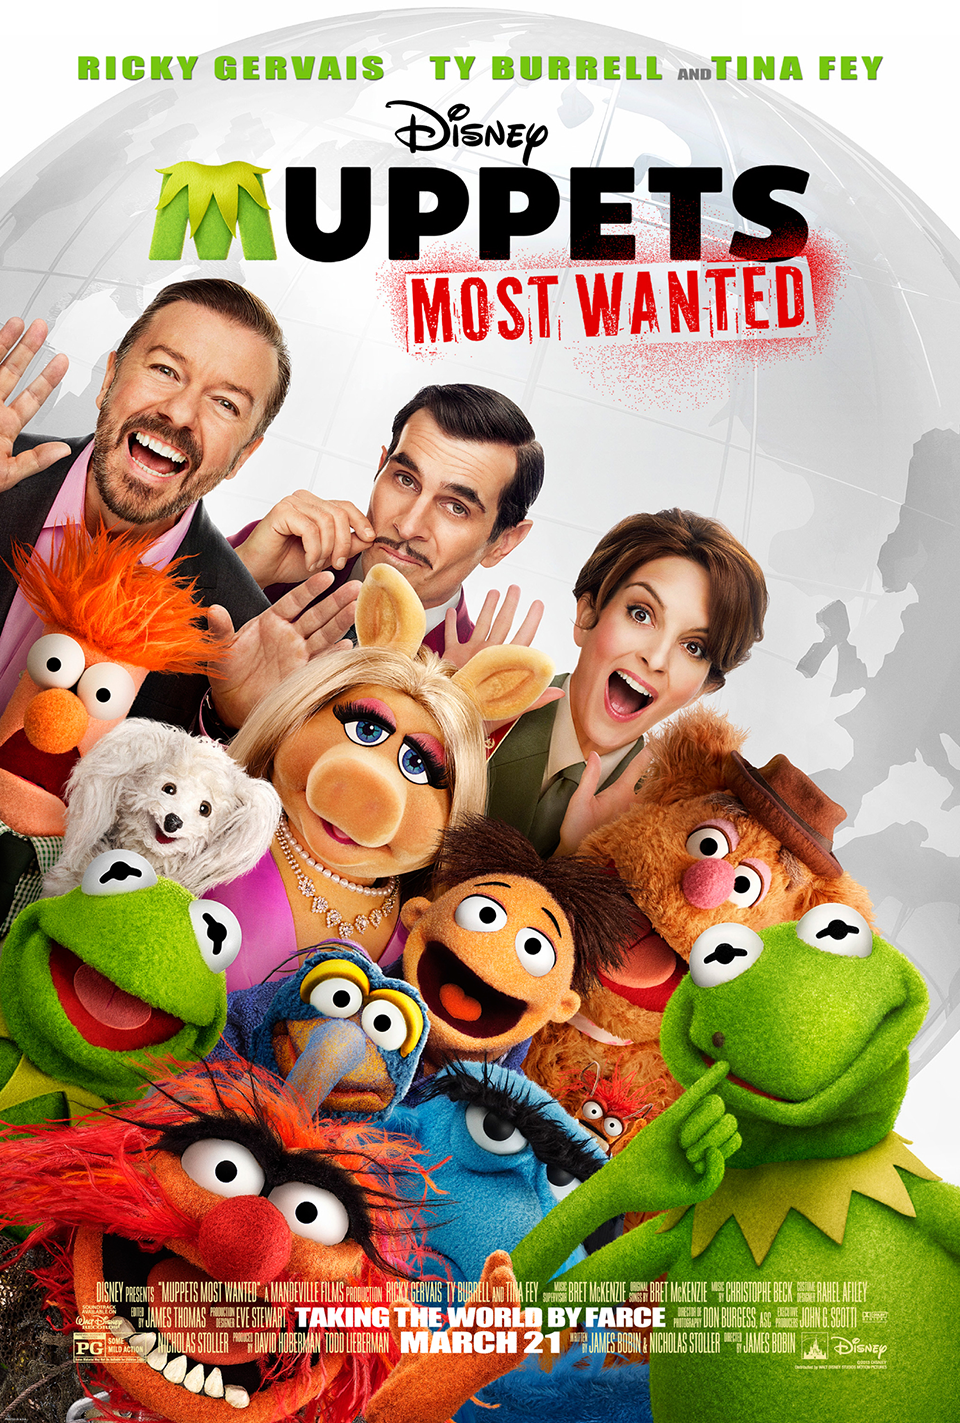 Muppets Most Wanted (2014) Feature Film :: Uni-versal Extras